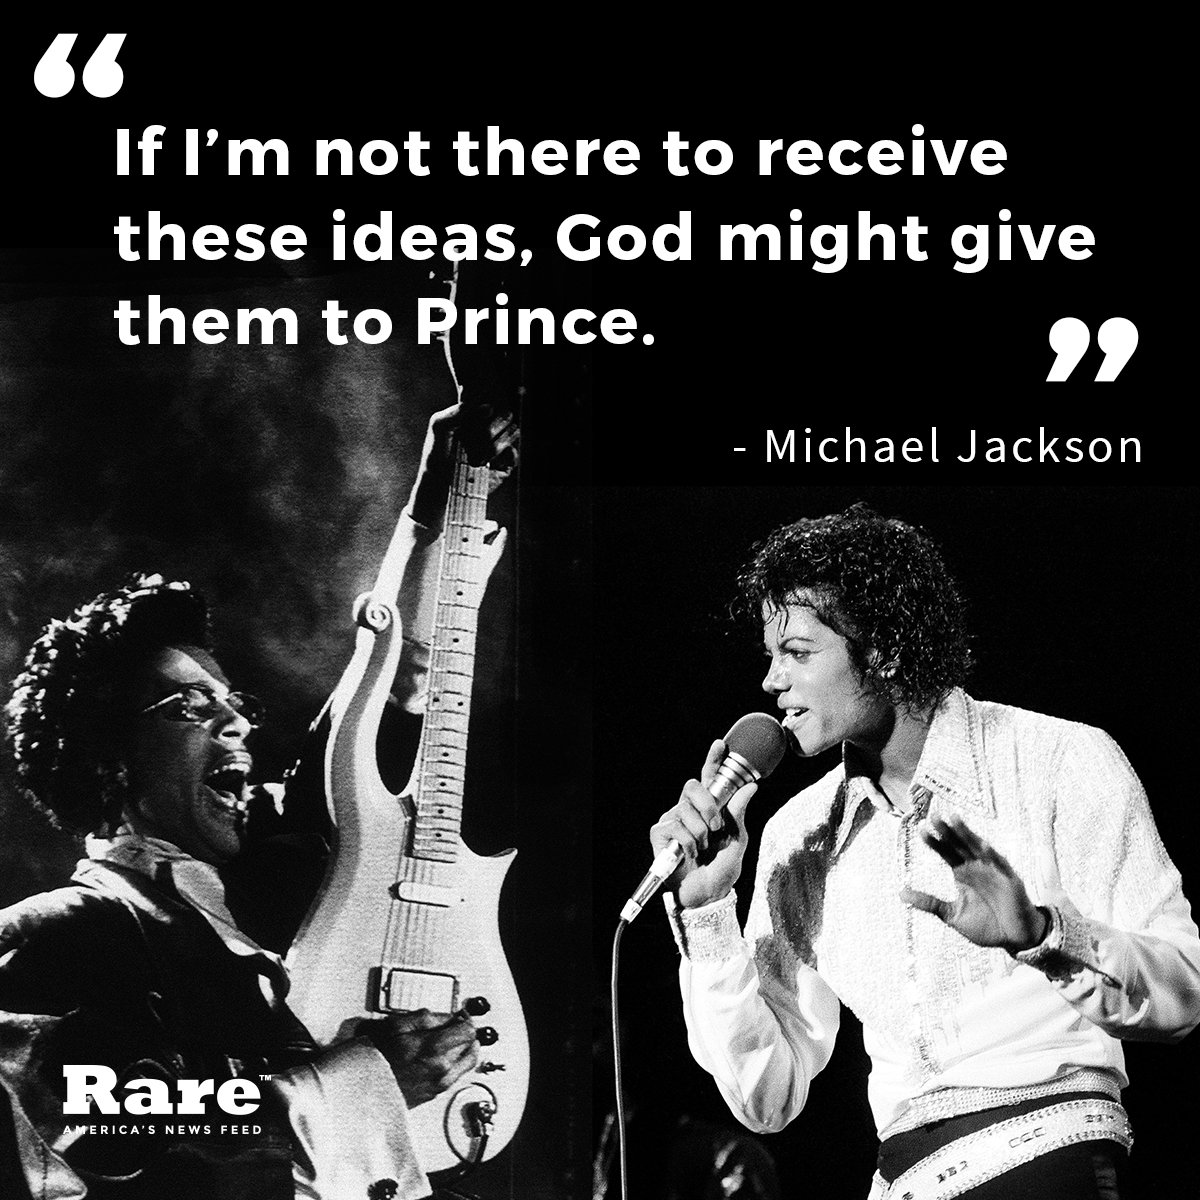 RT @Rare: The quote Michael Jackson once gave about Prince is just too perfect. #RIPPrince https://t.co/BMFW5AyFWM https://t.co/w9uoftGYnO